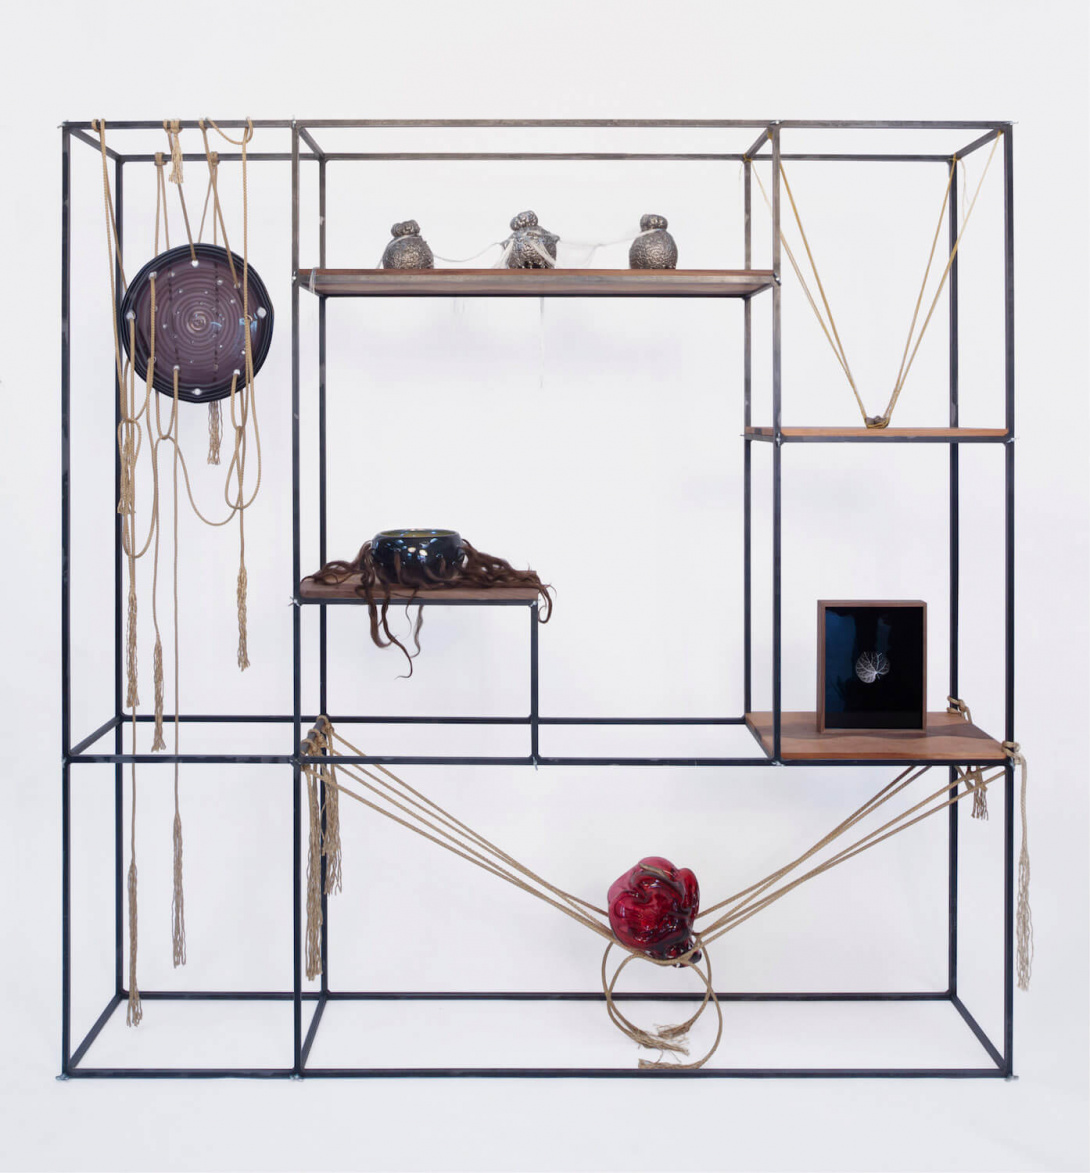 An installation of art objects sit on and hang from a large metal square object. Some objects are round and hard, while others look round or very soft, made of rope.  